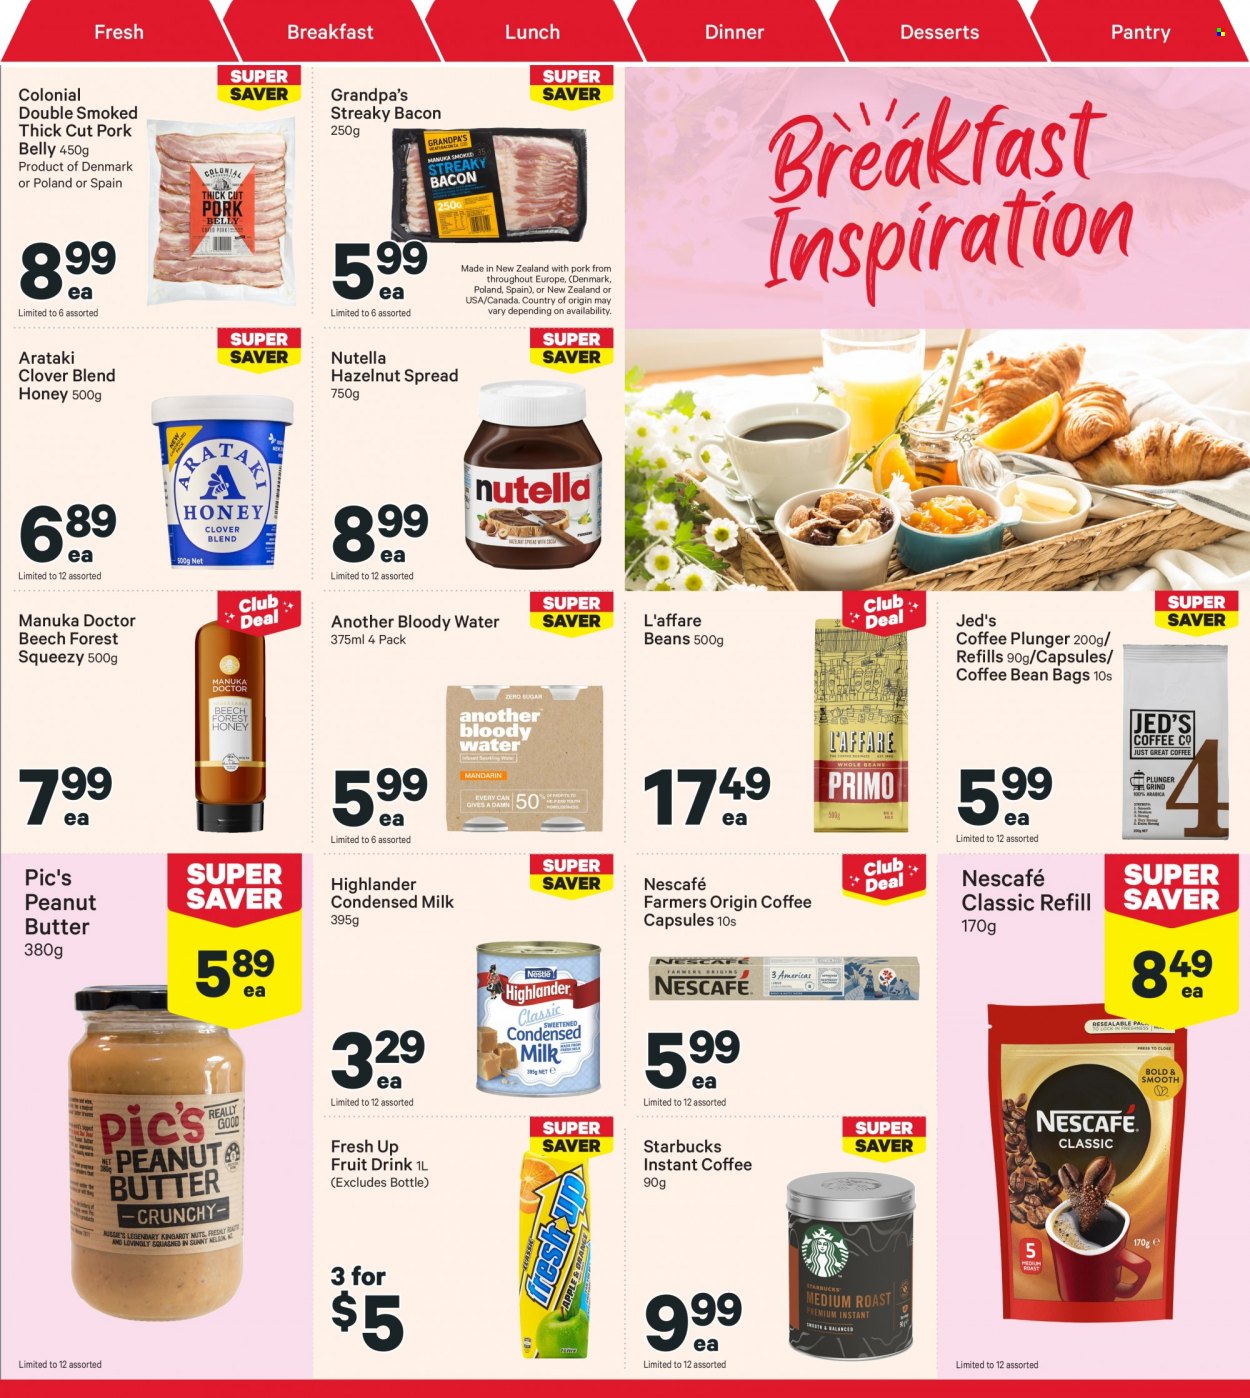 thumbnail - New World mailer - 06.02.2023 - 12.02.2023 - Sales products - bacon, streaky bacon, Clover, milk, condensed milk, Nutella, honey, peanut butter, hazelnut spread, fruit drink, coffee, instant coffee, Nescafé, coffee capsules, Starbucks, pork belly, pork meat, bag. Page 13.